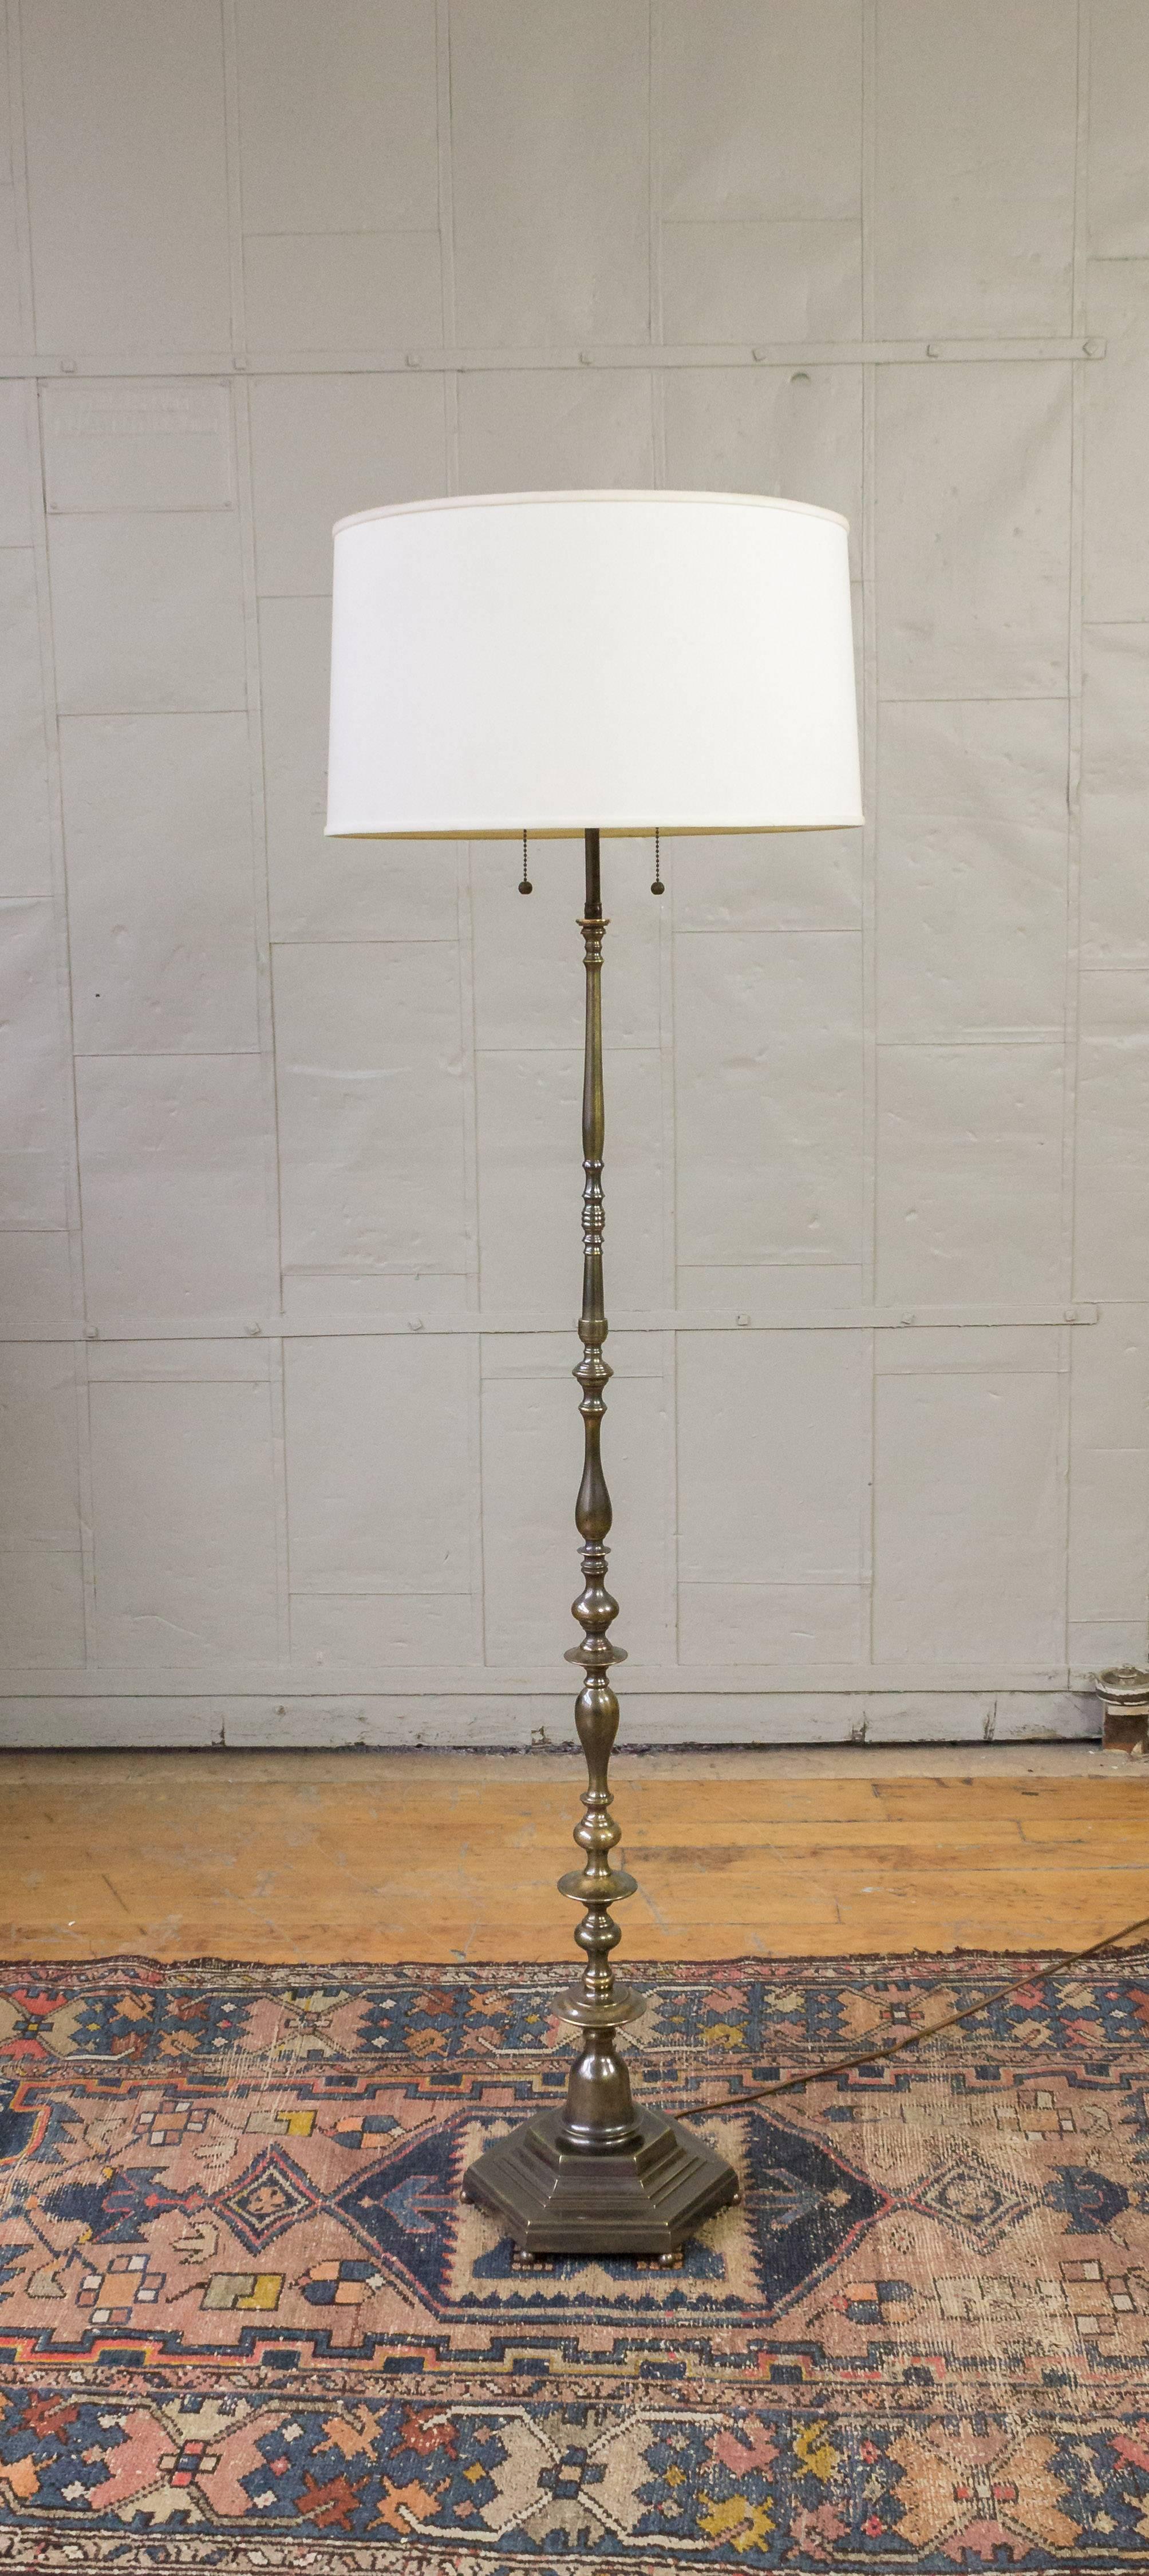 This beautiful French 1940s floor lamp boasts a cast hexagonal base that sits on ball feet, adding stability and elegance to its design. The stem of this lamp is made up of turned and cast bronze components that taper elegantly to create a unique